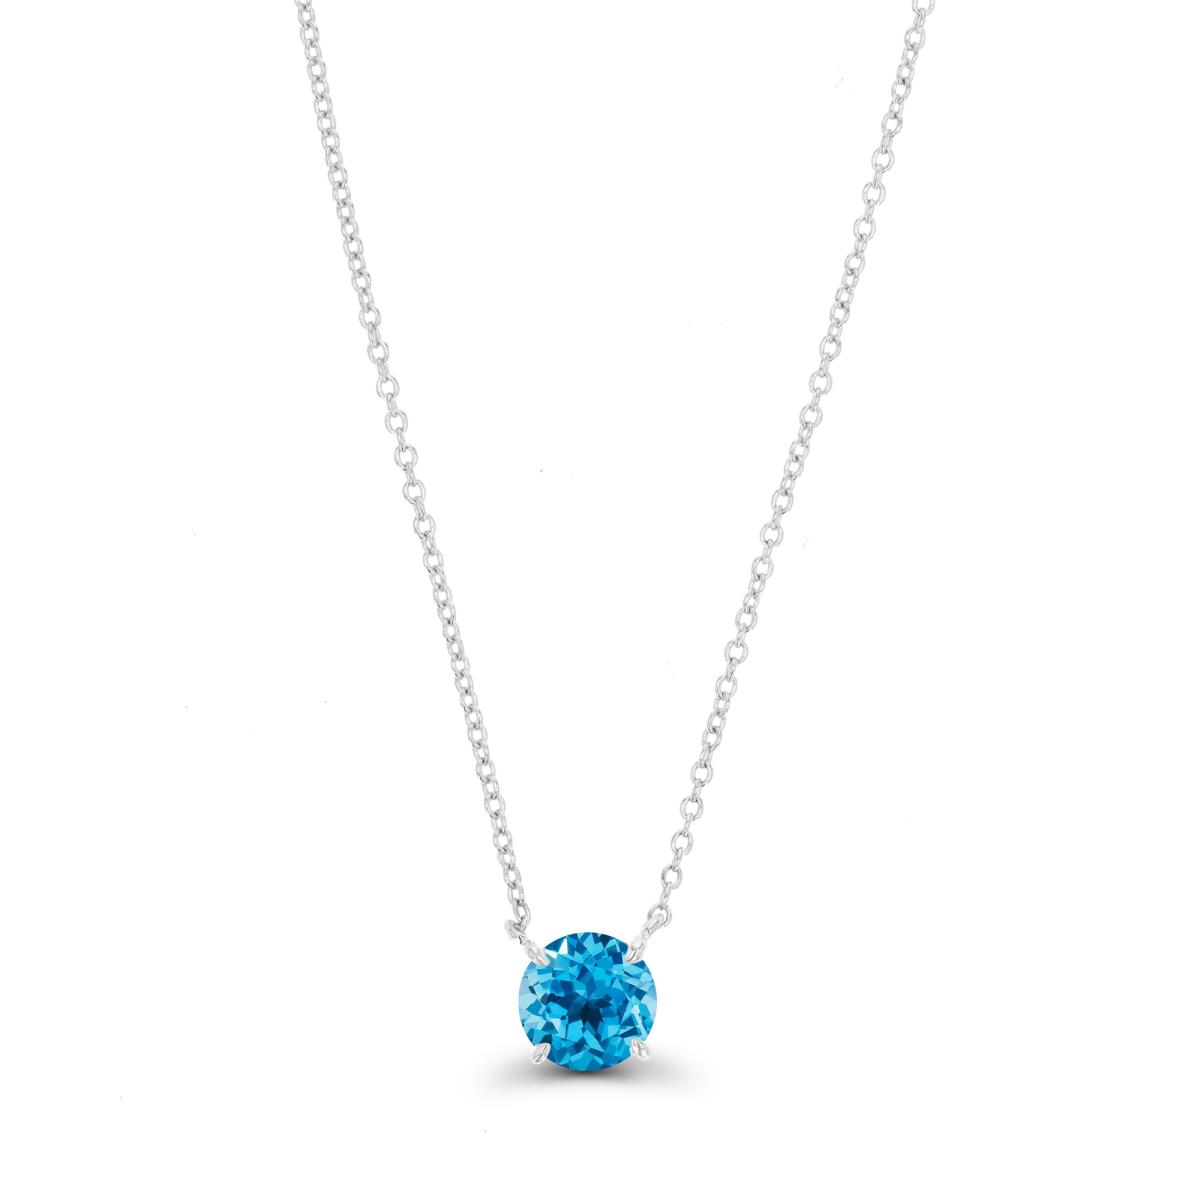 14K White & 6MM RD Ct. Blue Topaz Solitaire 16+2" Necklace